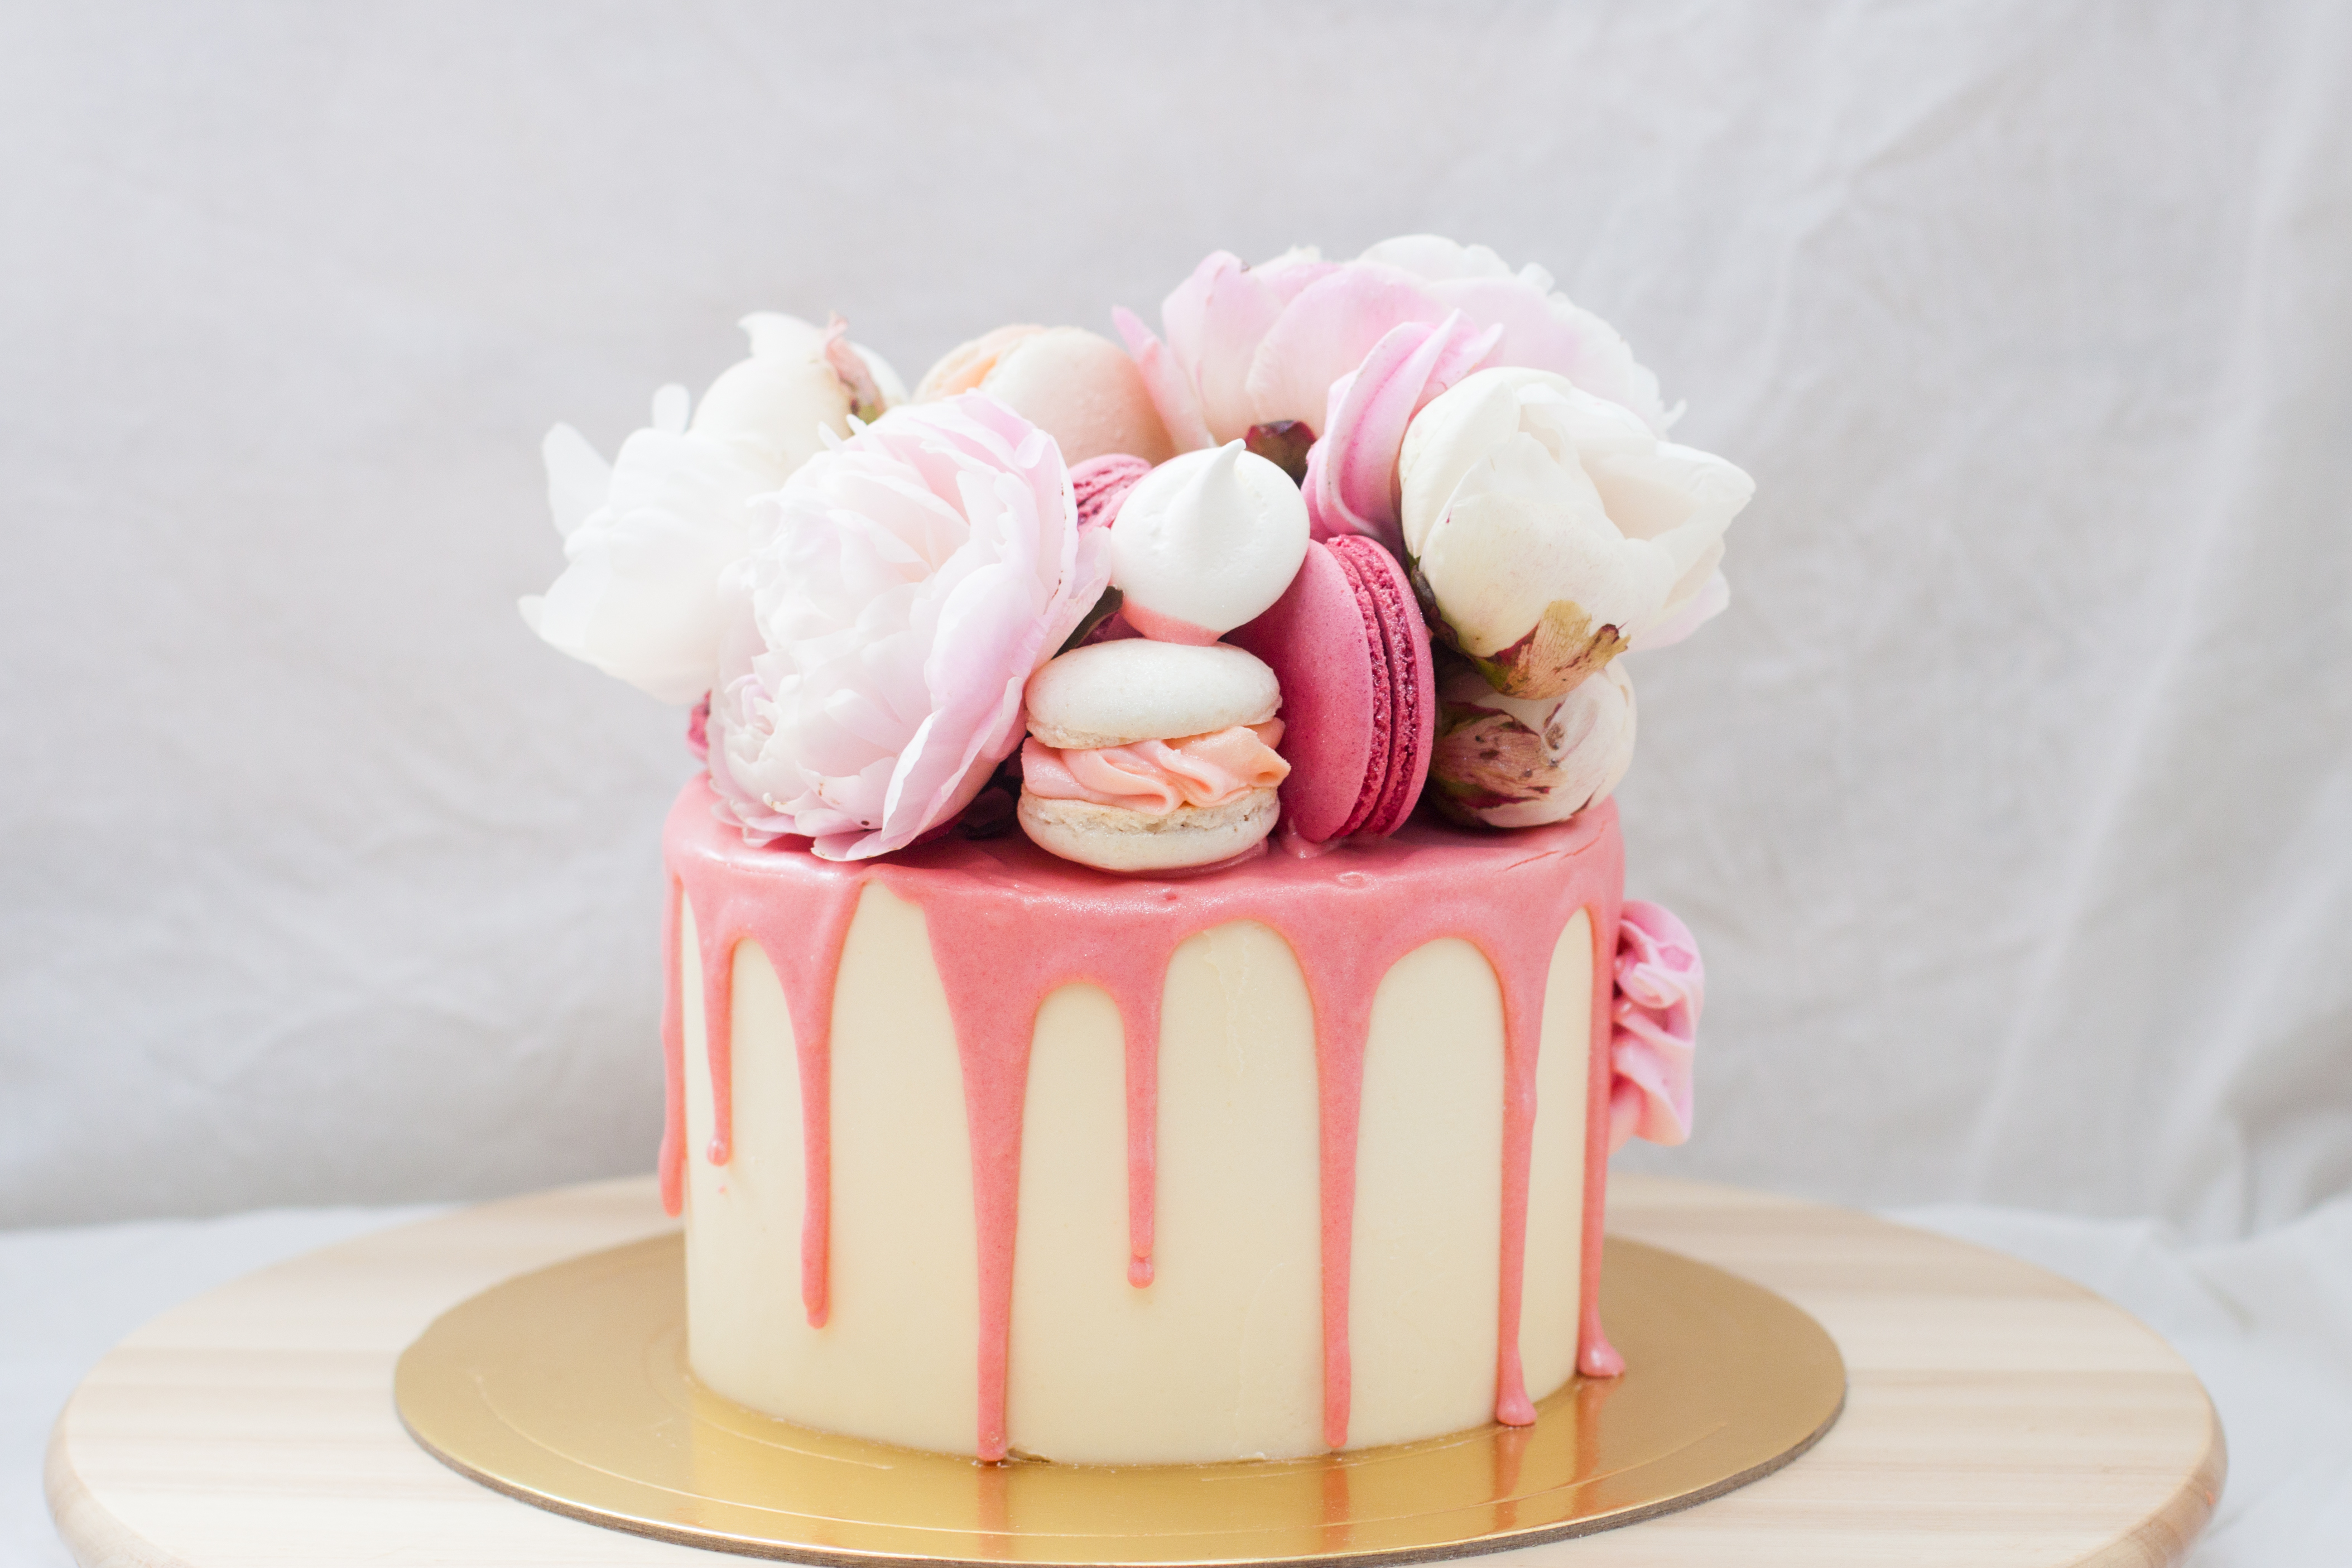 Small birthday cake with melted pink chocolate, fresh peonies, macaroons and meringues on white background | Source: Getty Images